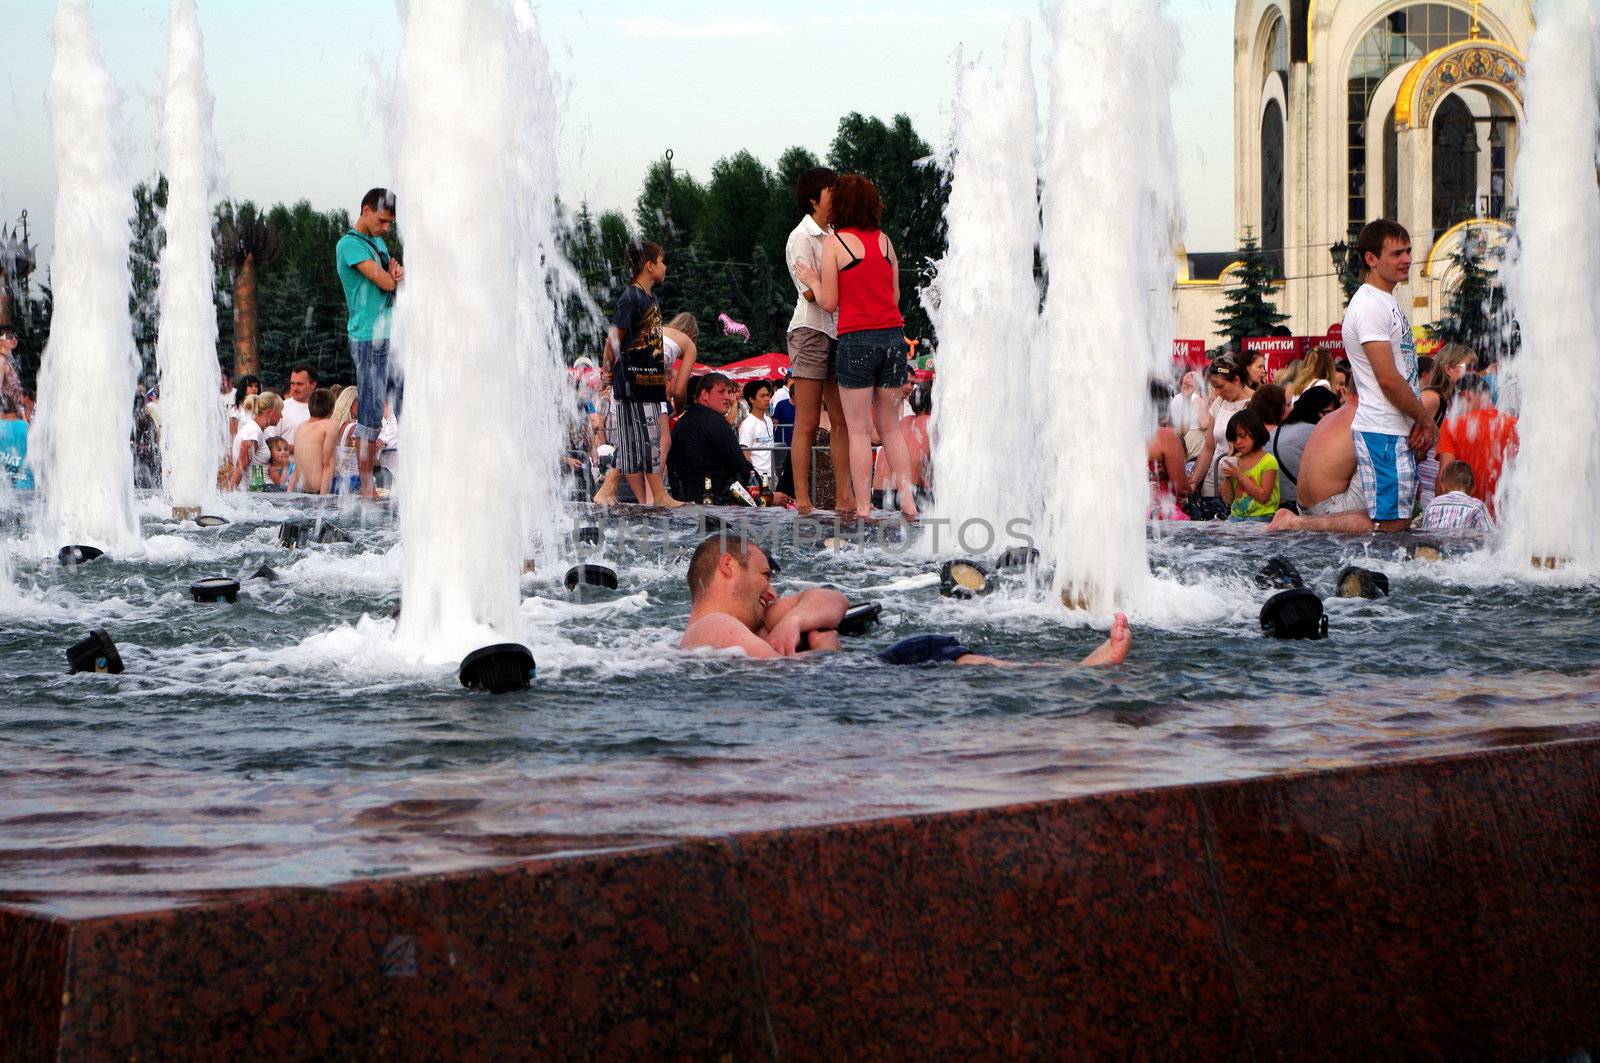 Moscow, Russia - June 26, 2010: Summer day. Peoples have fun in youth day celebration on June 26, 2010 at victory park in Moscow, Russia by Stoyanov